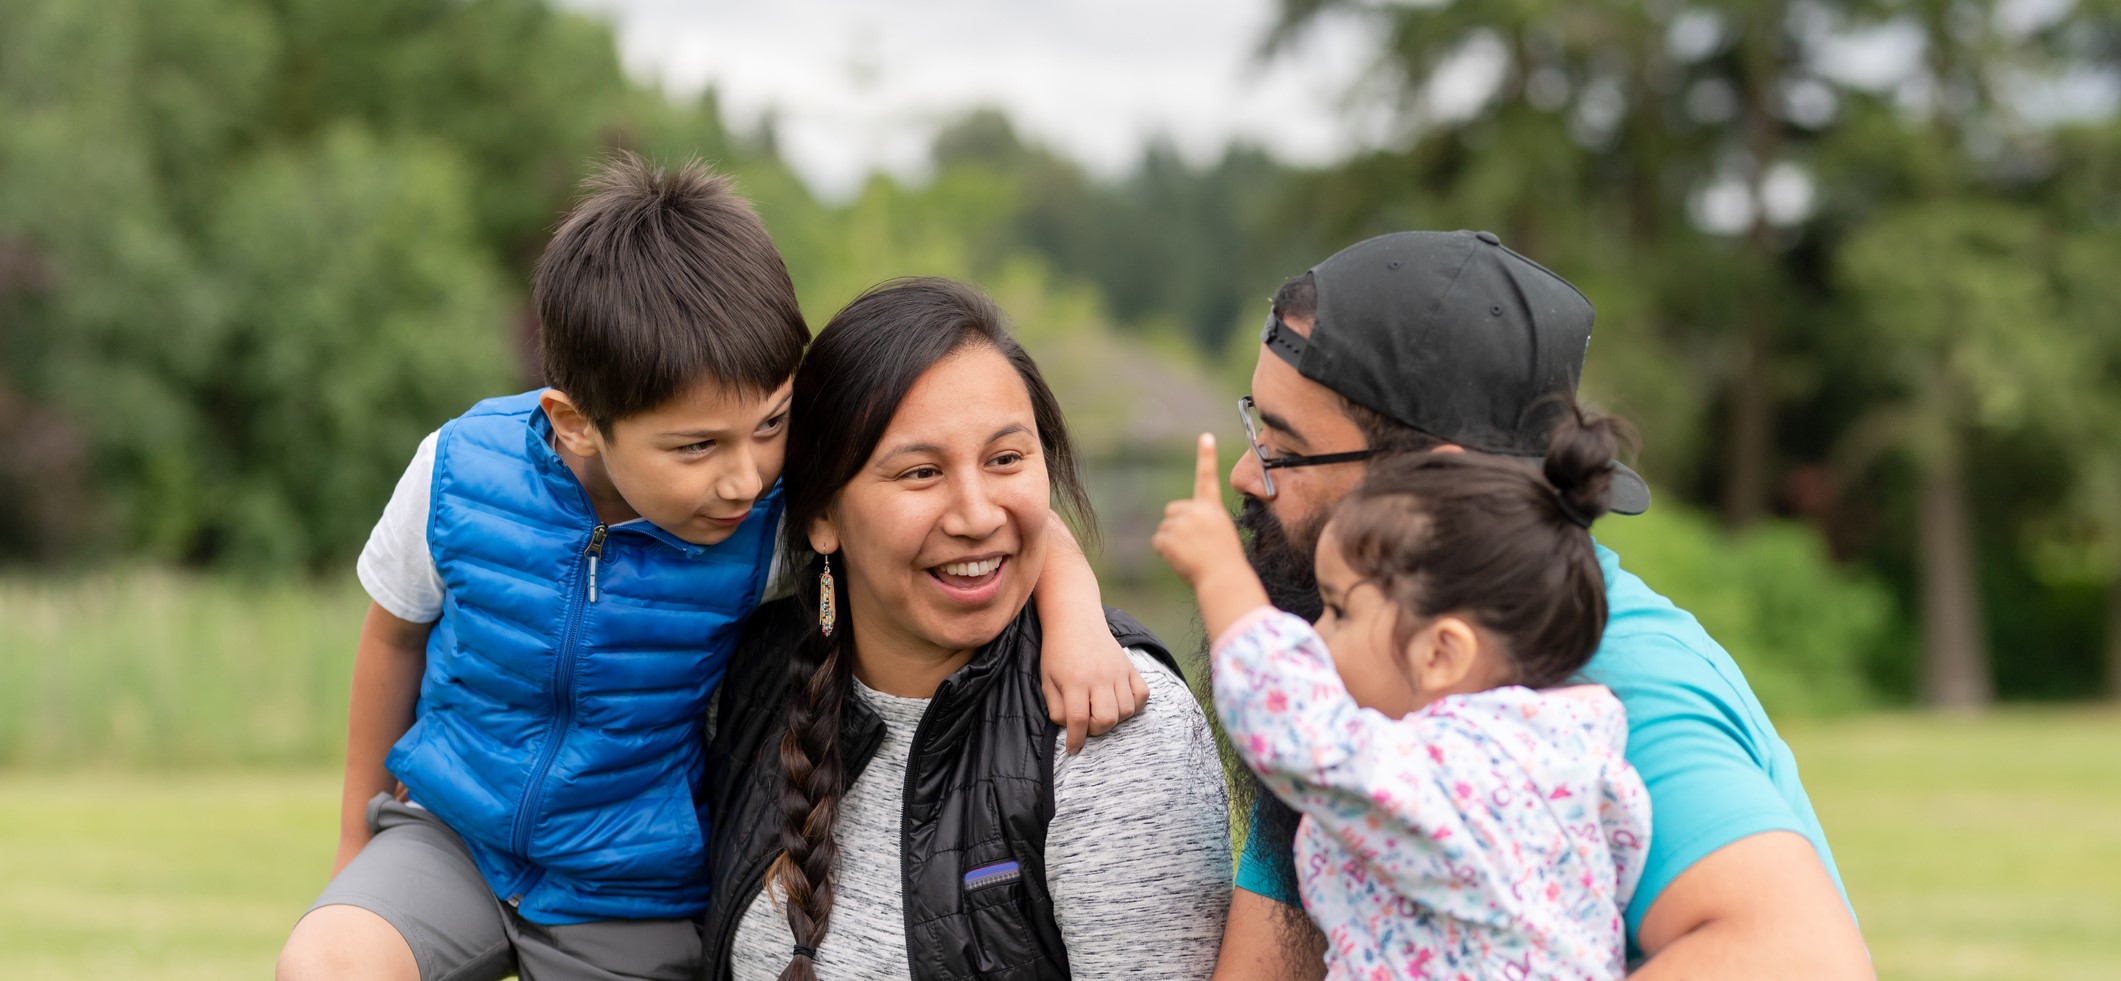 An Indigenous family smiling in the park, two young children and their parents.